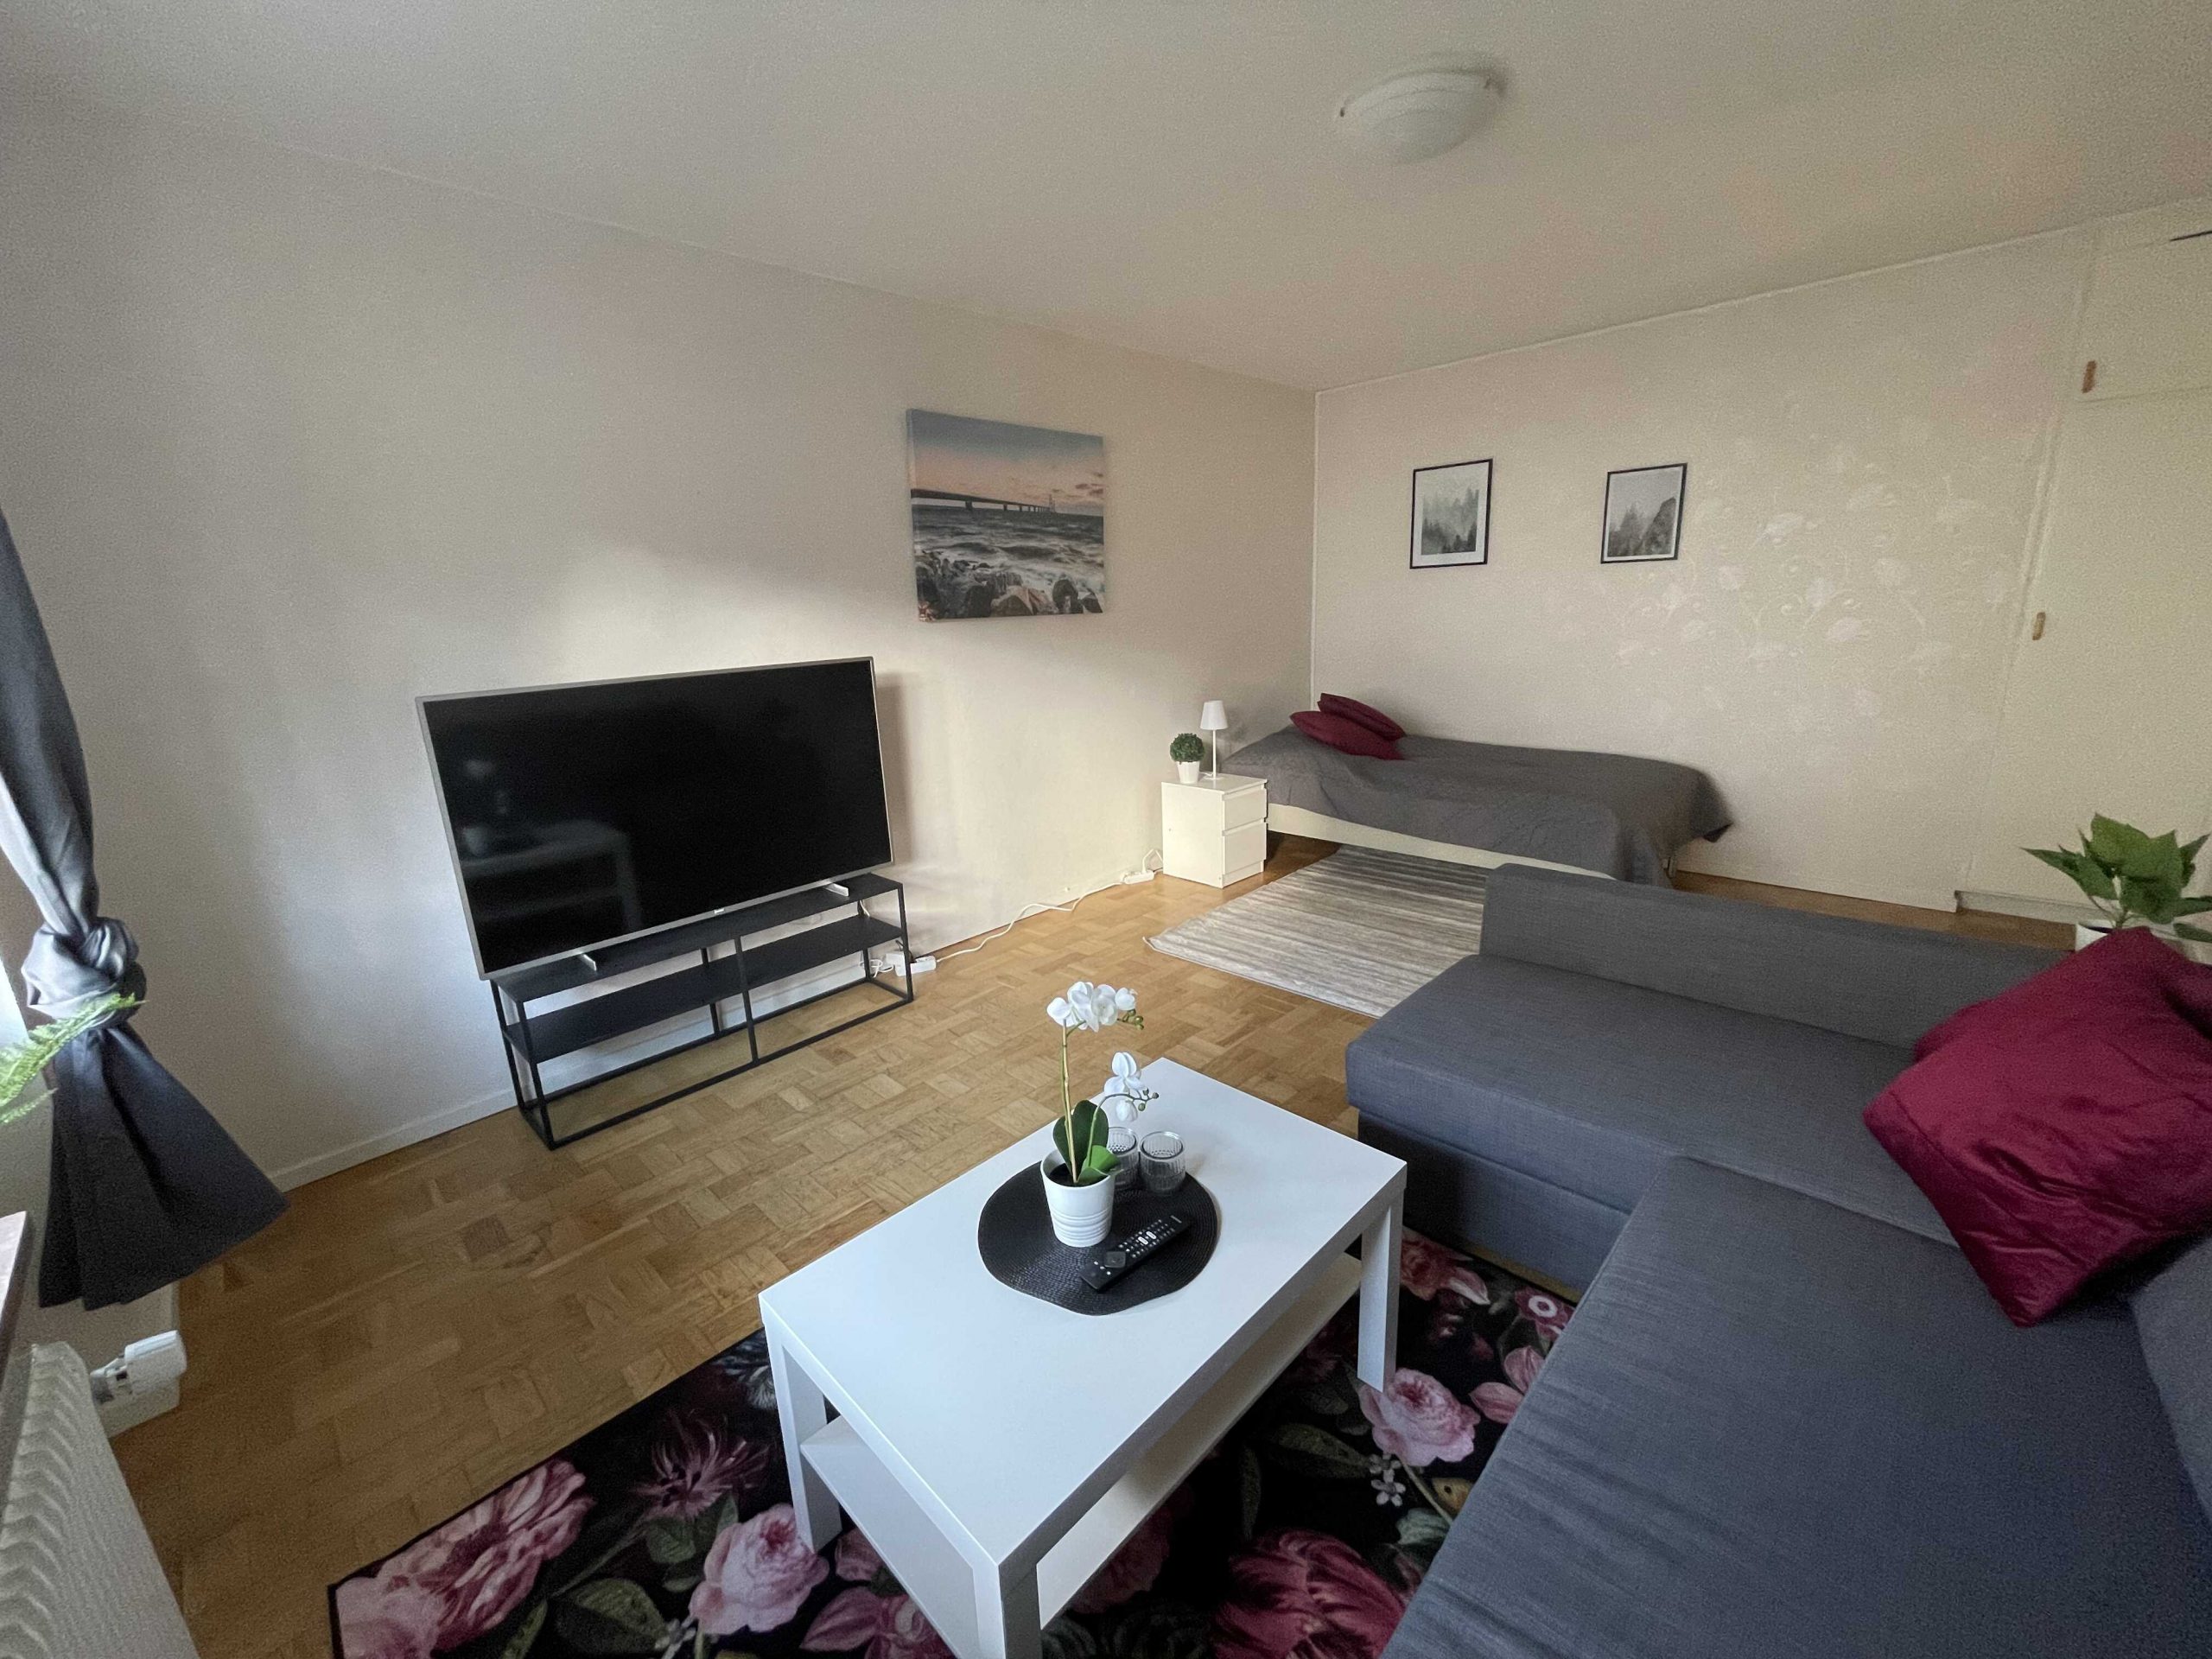 ﻿﻿﻿﻿Serviced apartment, business apartent, business accommodation